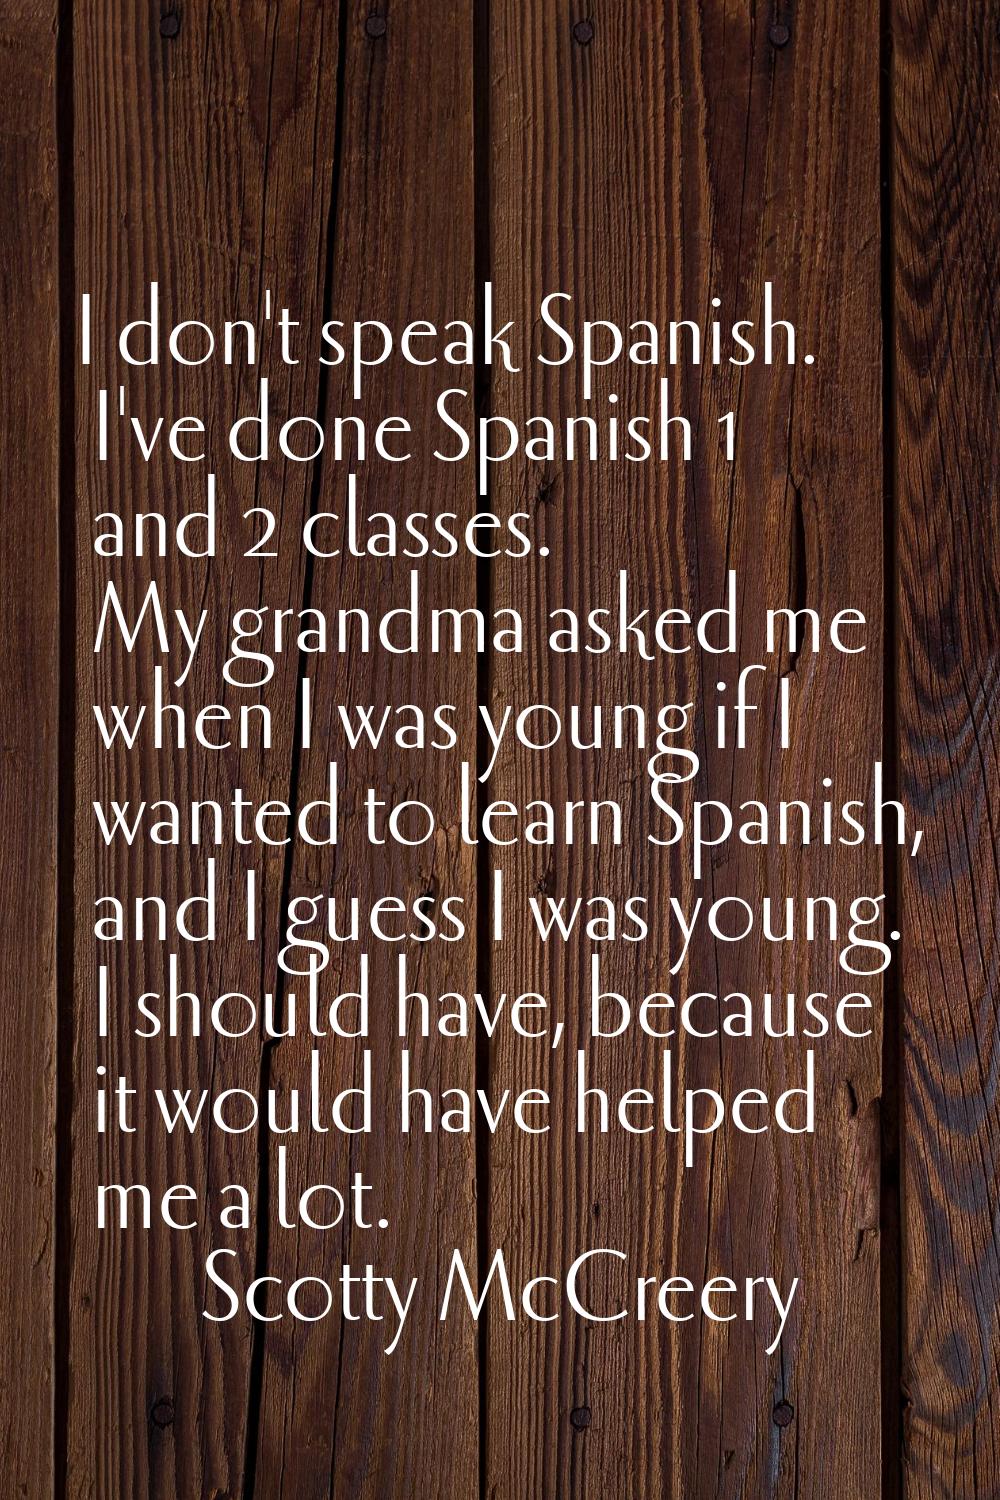 I don't speak Spanish. I've done Spanish 1 and 2 classes. My grandma asked me when I was young if I